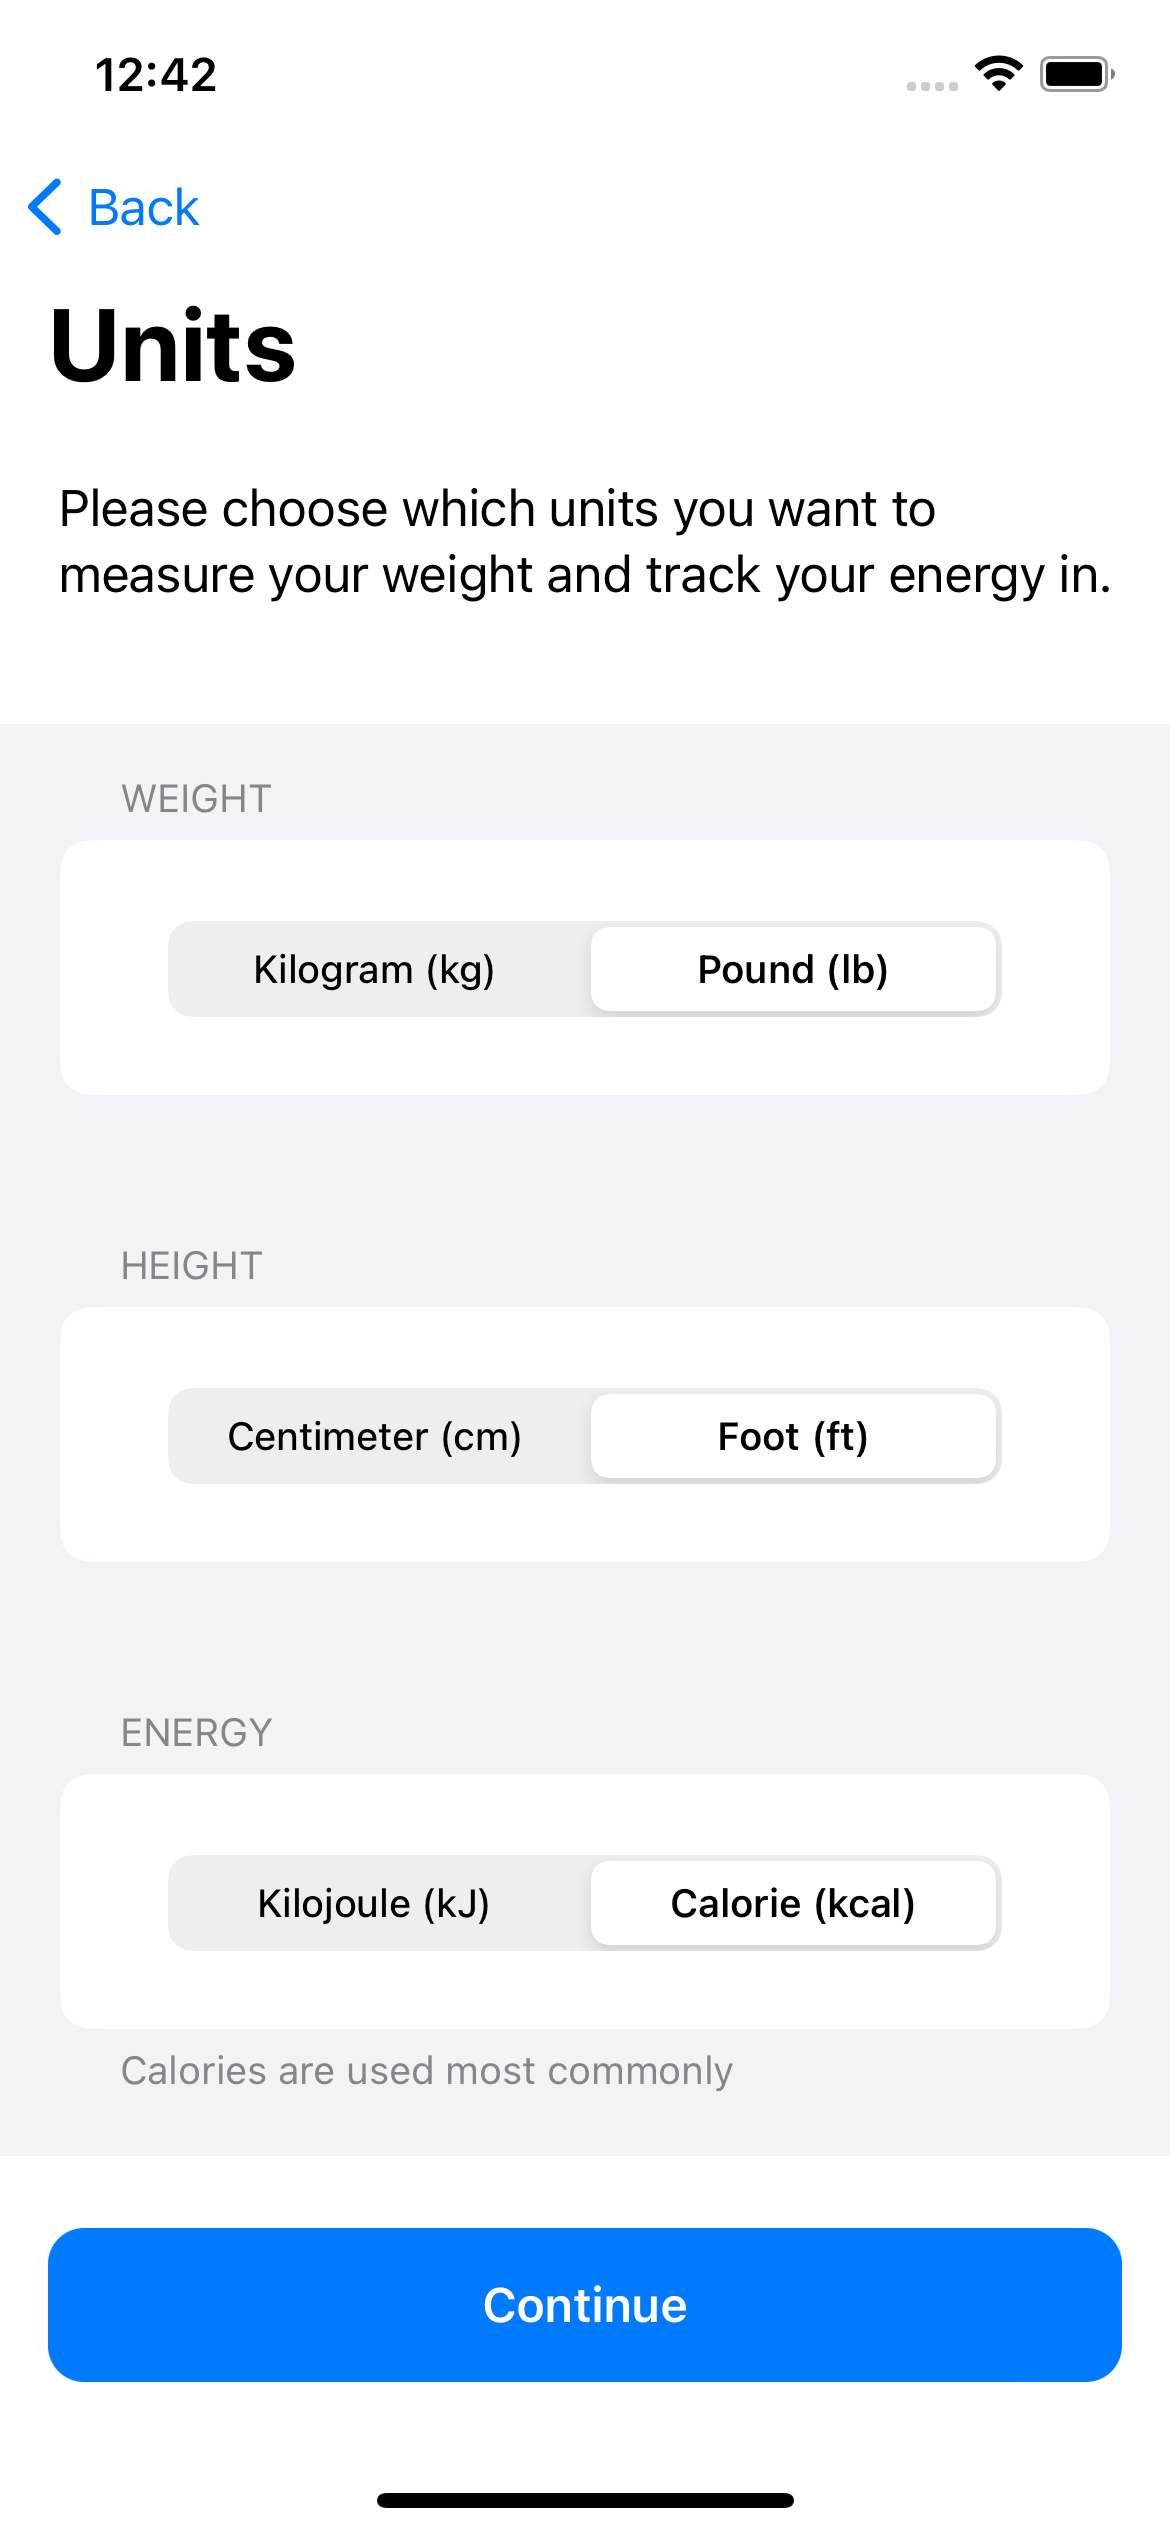 User can choose between metric or imperial units